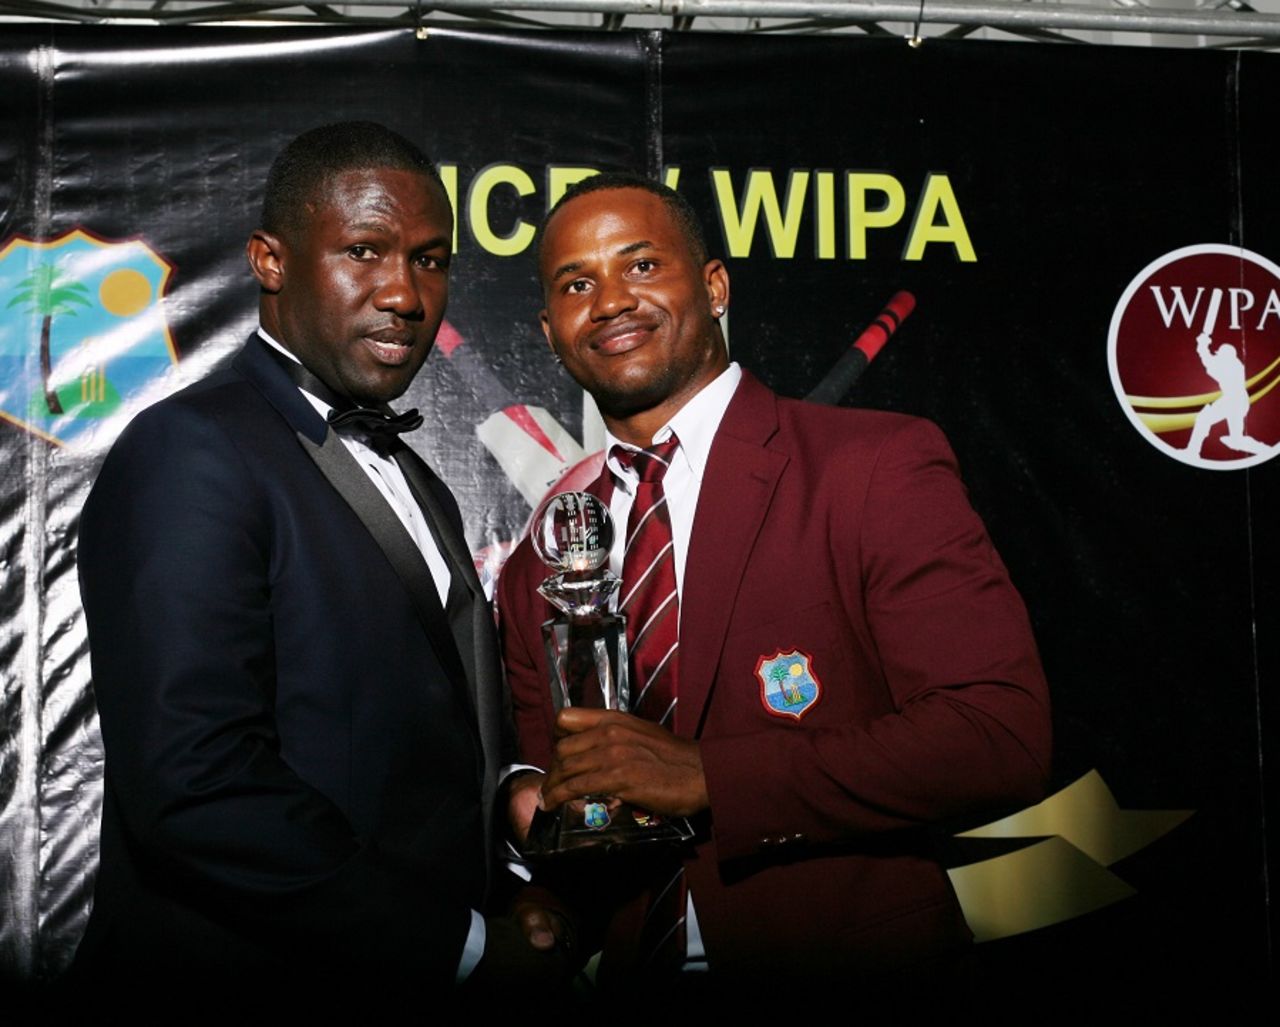 Marlon Samuels was named the ODI Player of the Year and Cricketer of the Year in WICB's annual awards function, Antigua, July 19, 2016